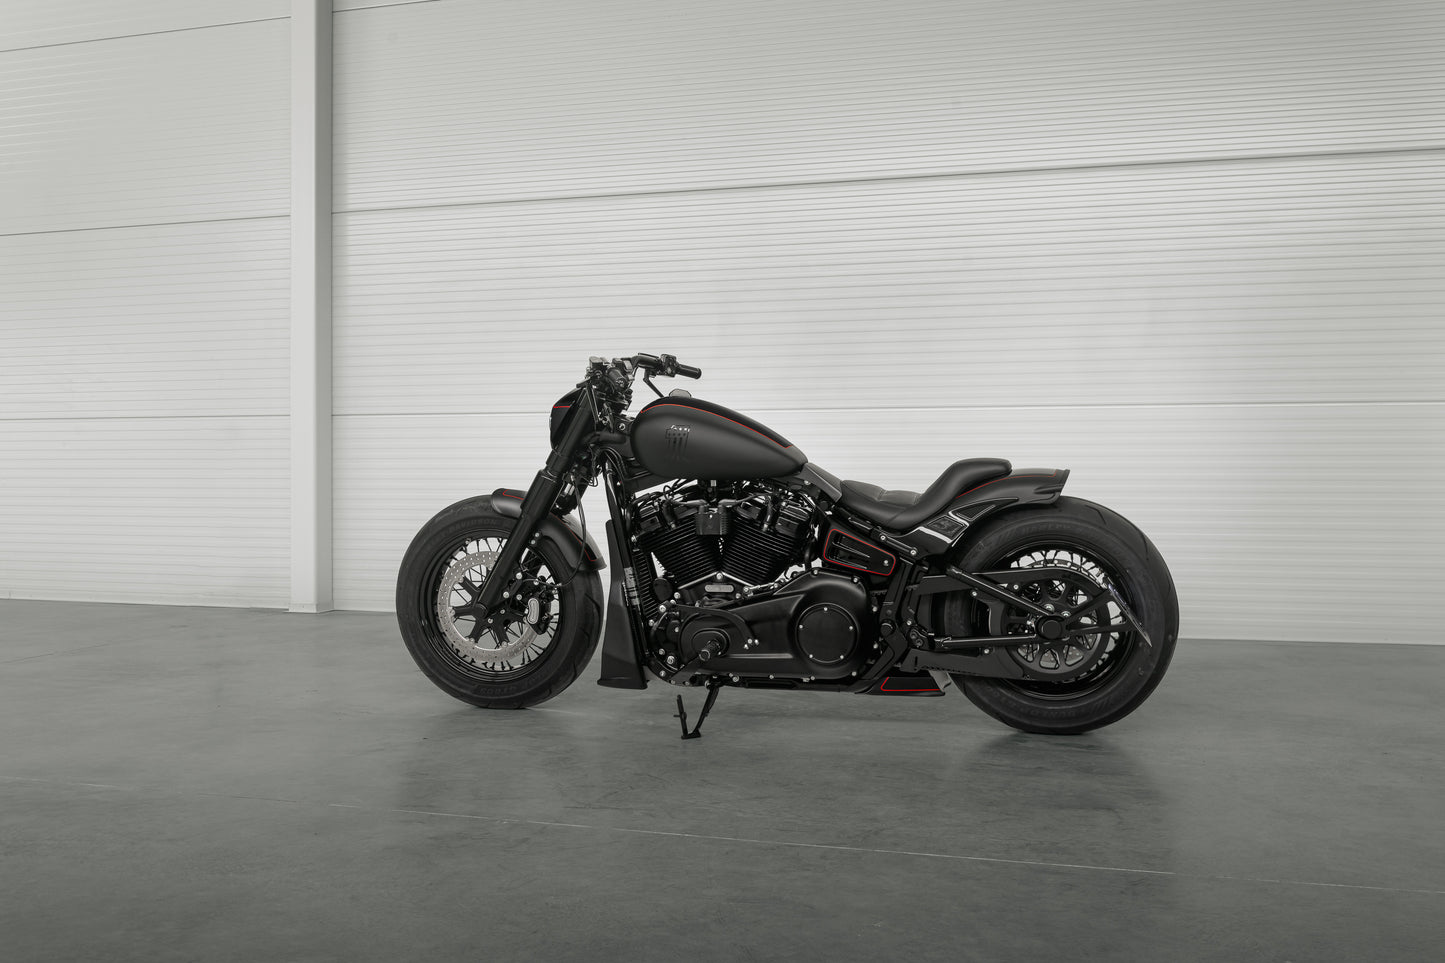 Harley Davidson motorcycle with Killer Custom wide triple trees set from the side in a spacious and modern garage